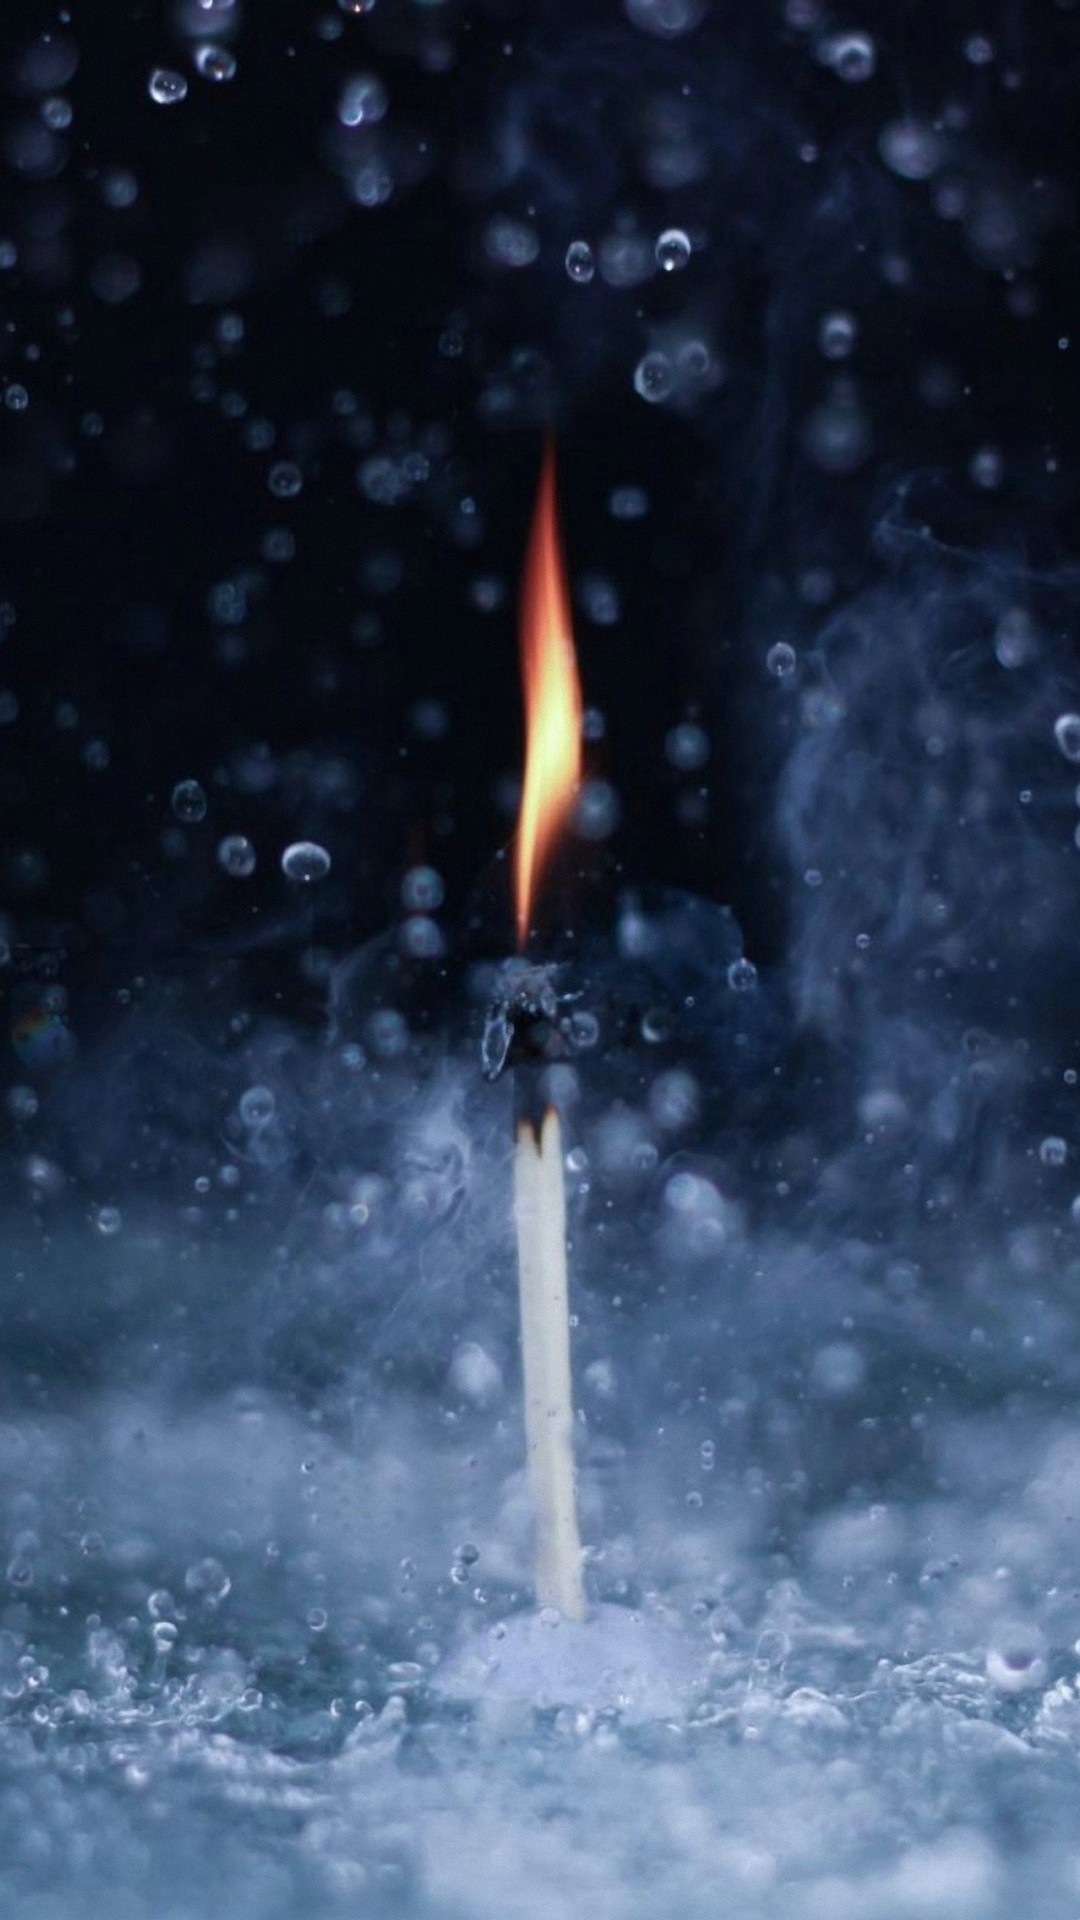 Fire in Water Wallpaper Android with HD resolution 1080x1920